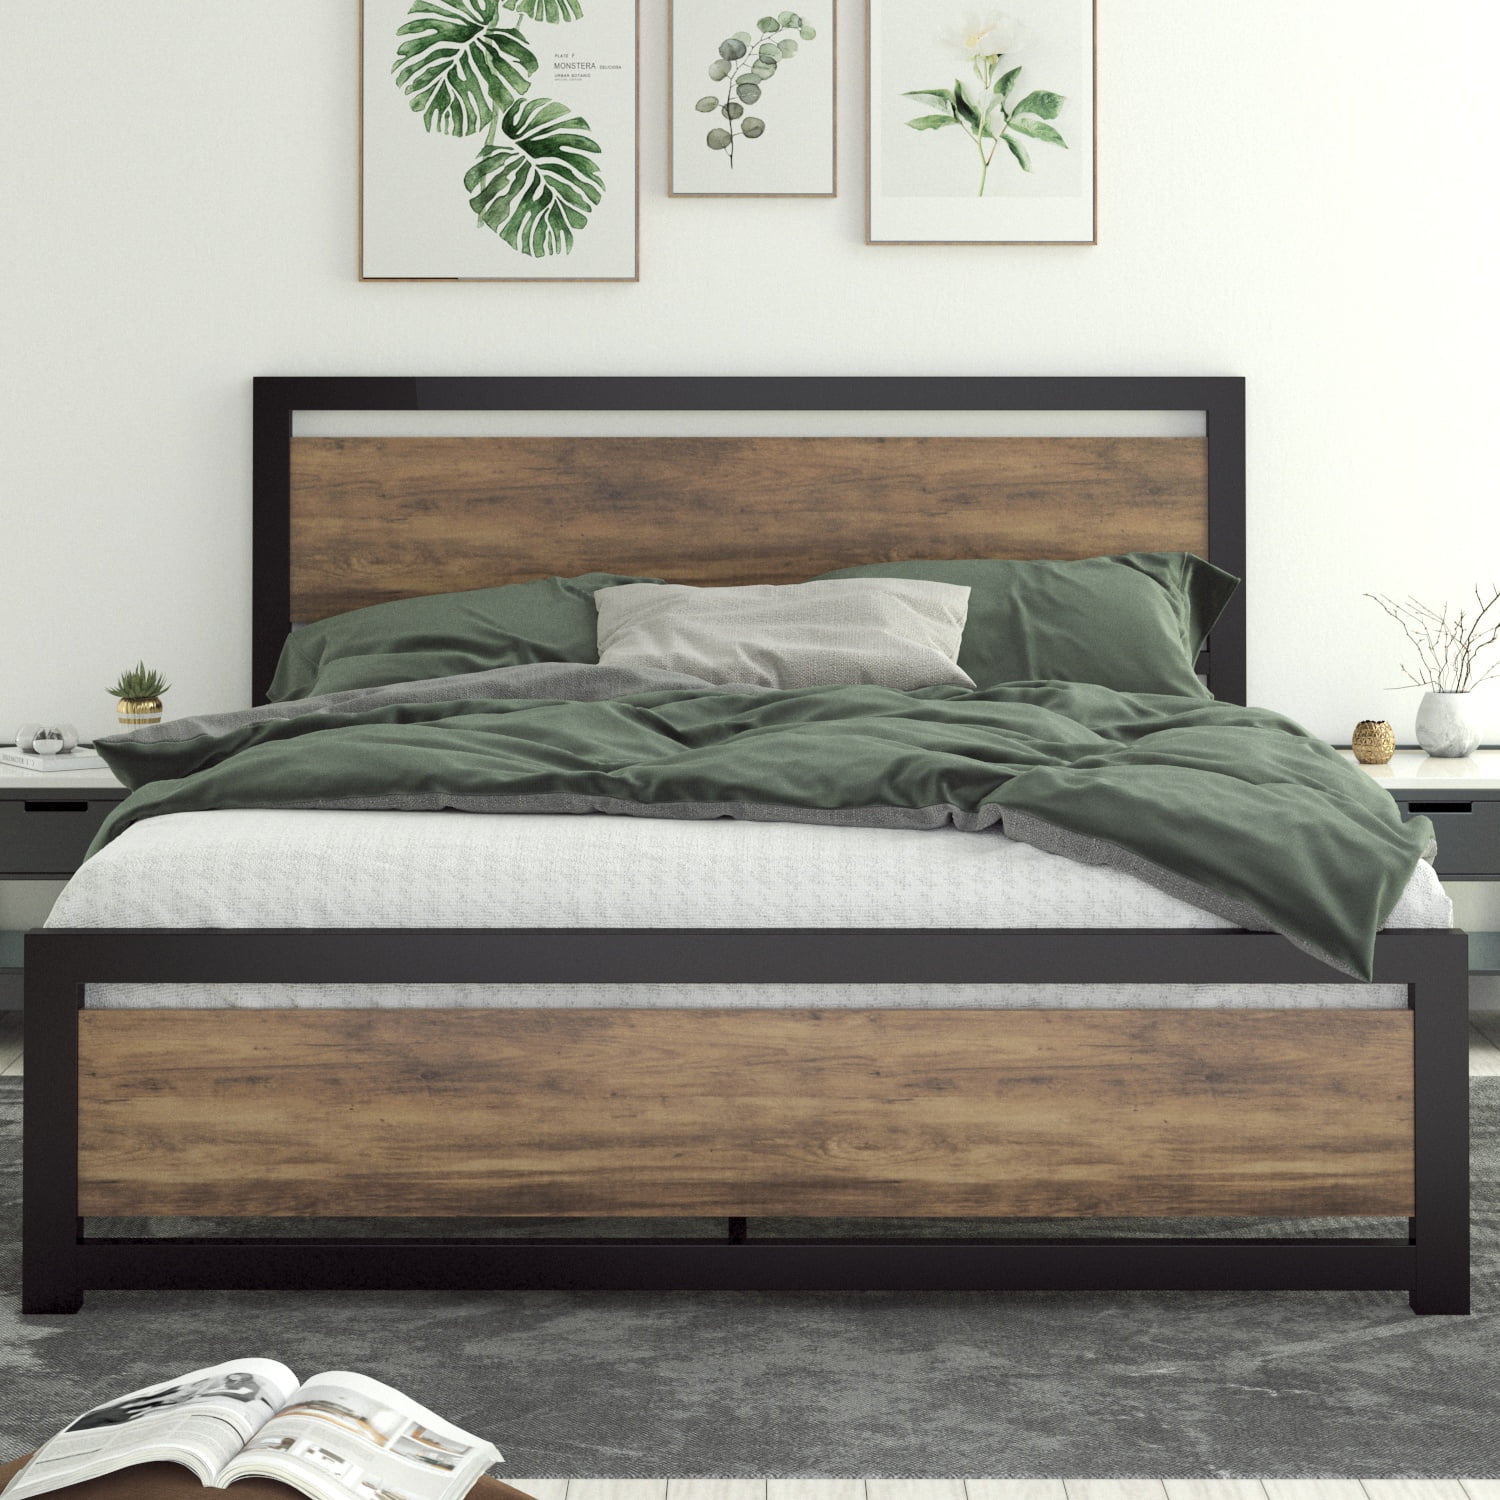 Allewie Brown Queen Size Bed Frame With, Queen Size Wood Headboard And Frame